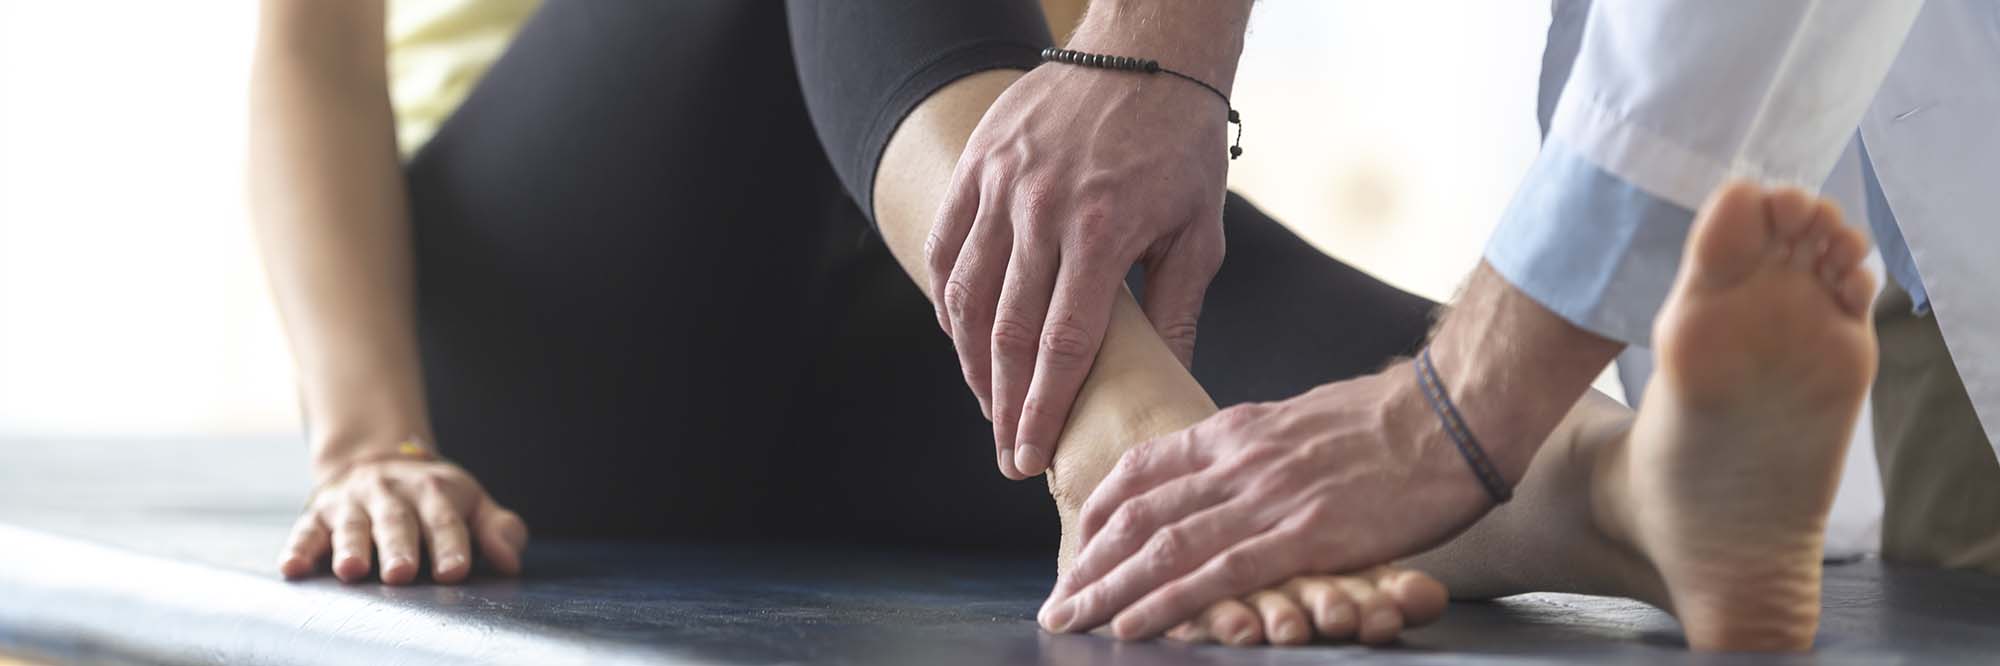 Sprained ankle vs. broken ankle: Symptoms to look for and when to see a doctor